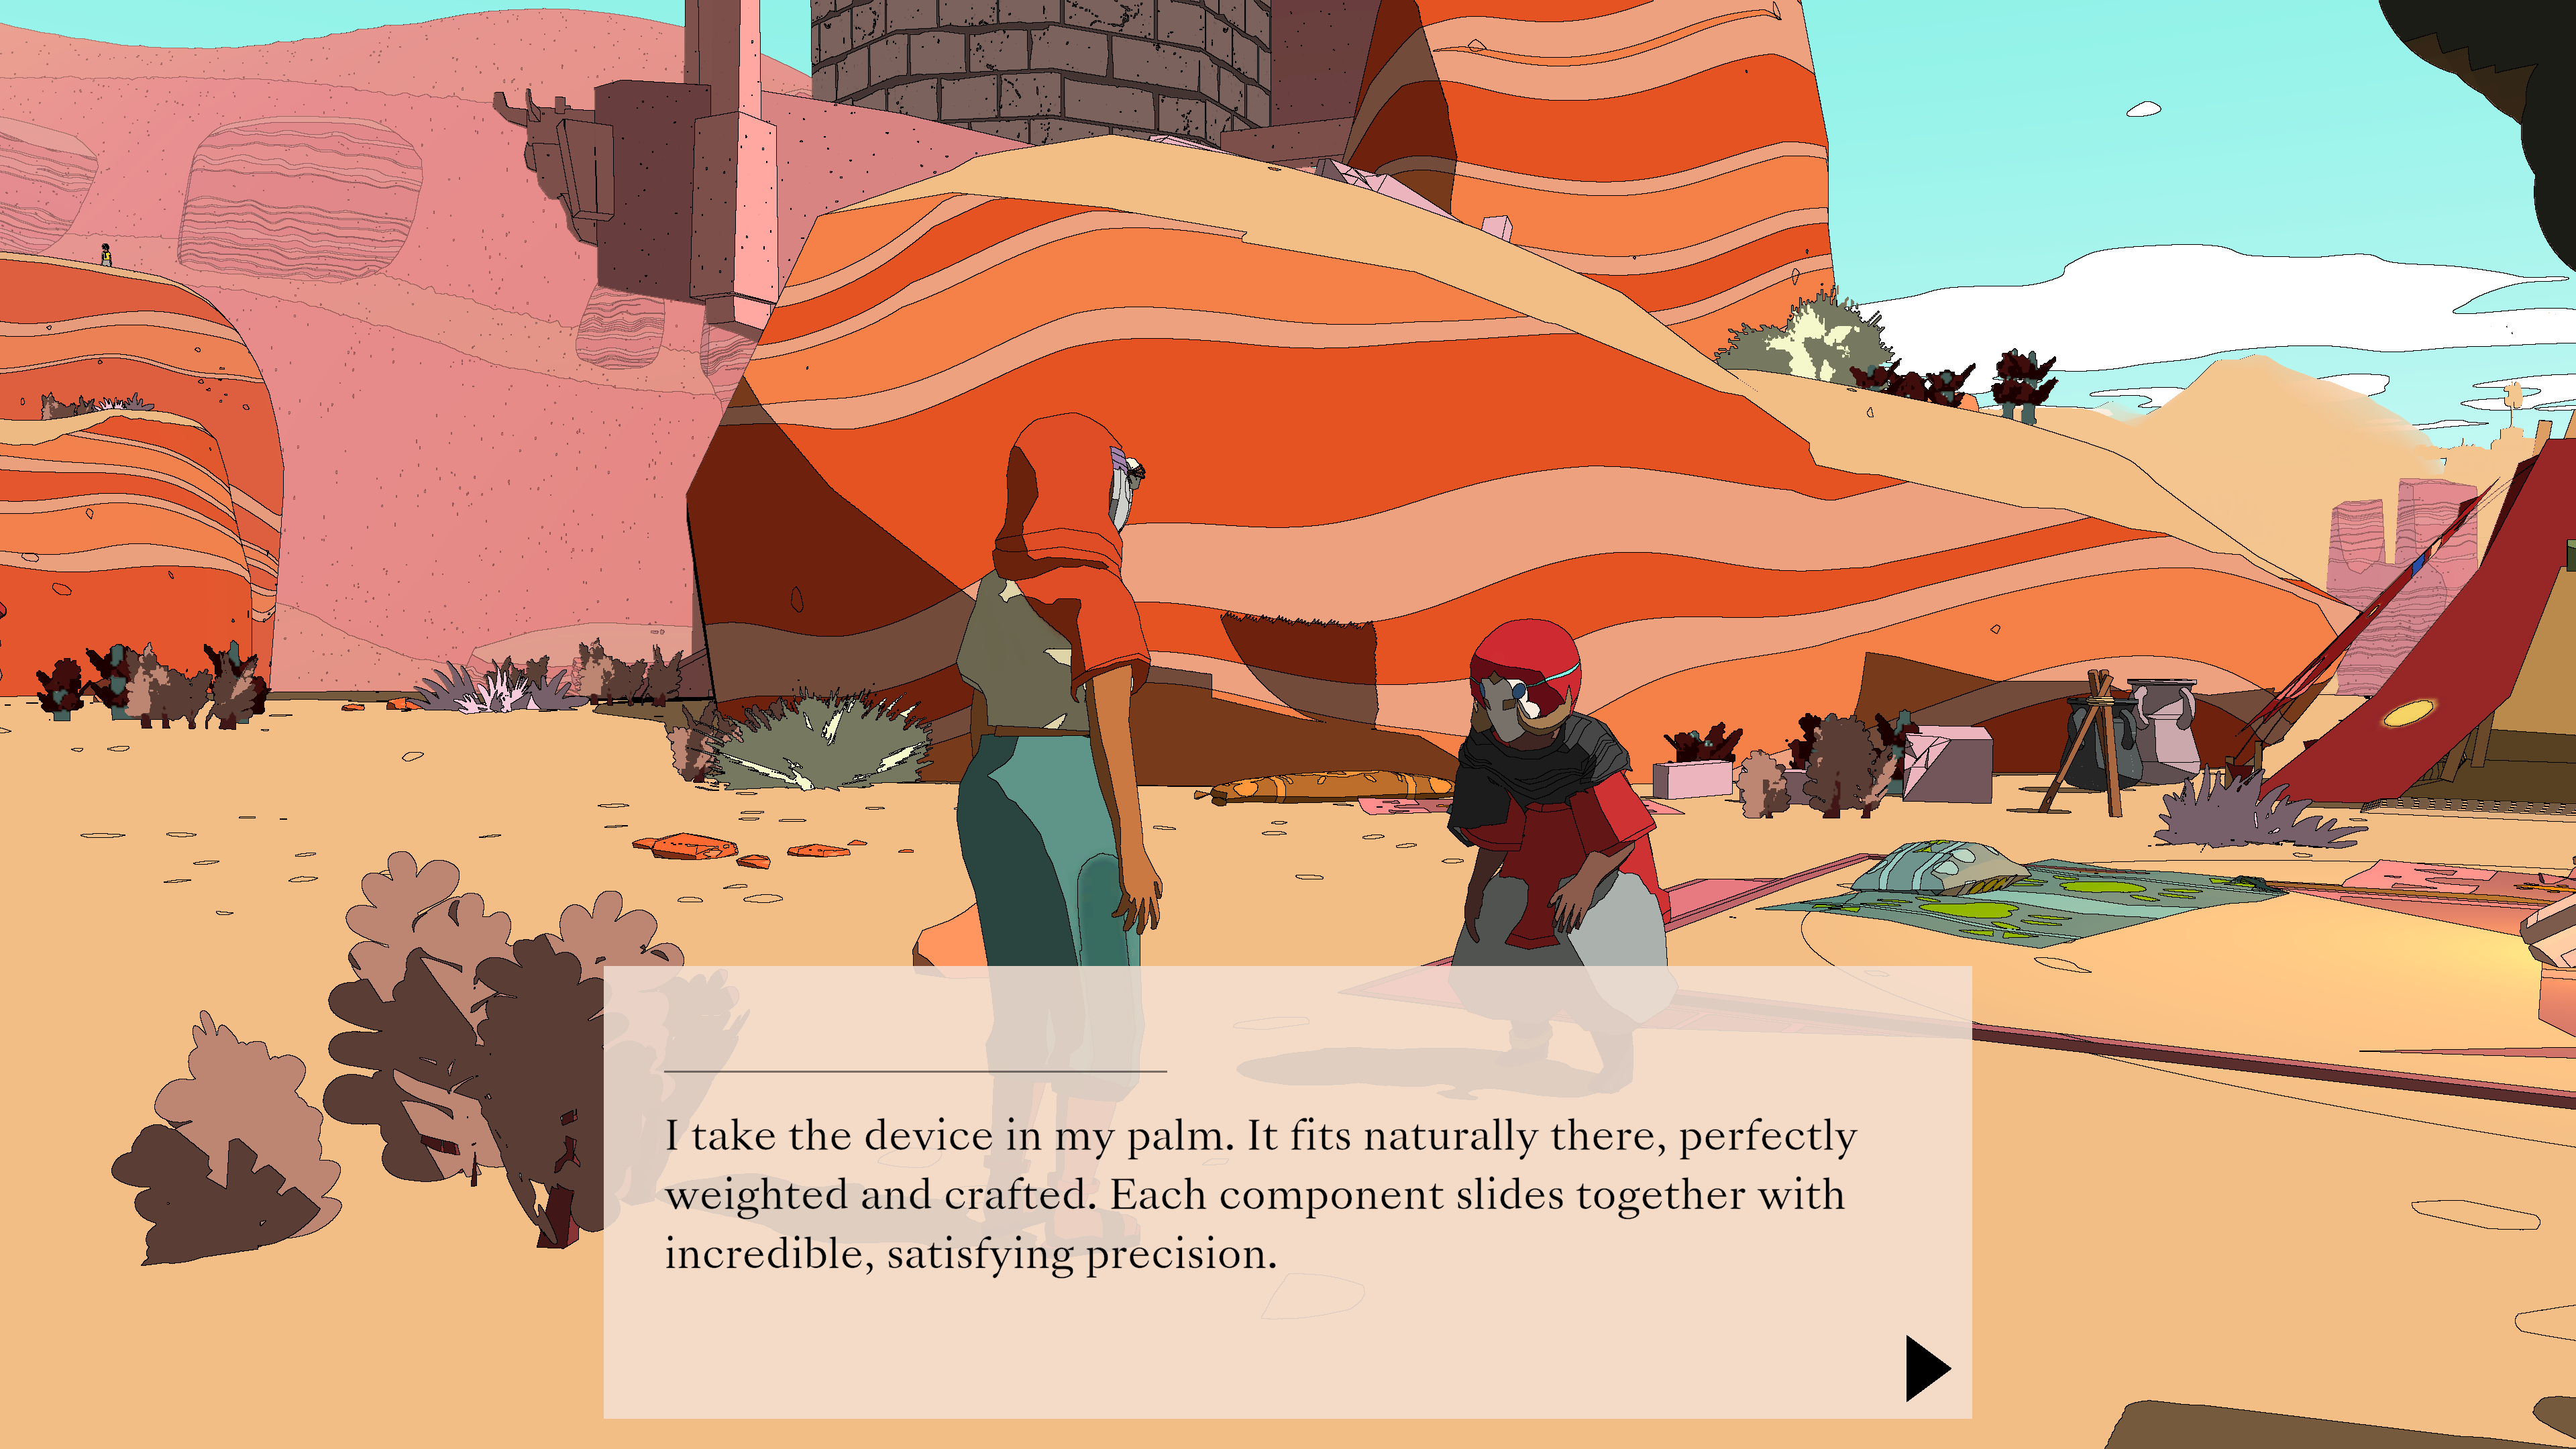 A screenshot of Sable chatting with a small elderly woman in a desert camp in Sable